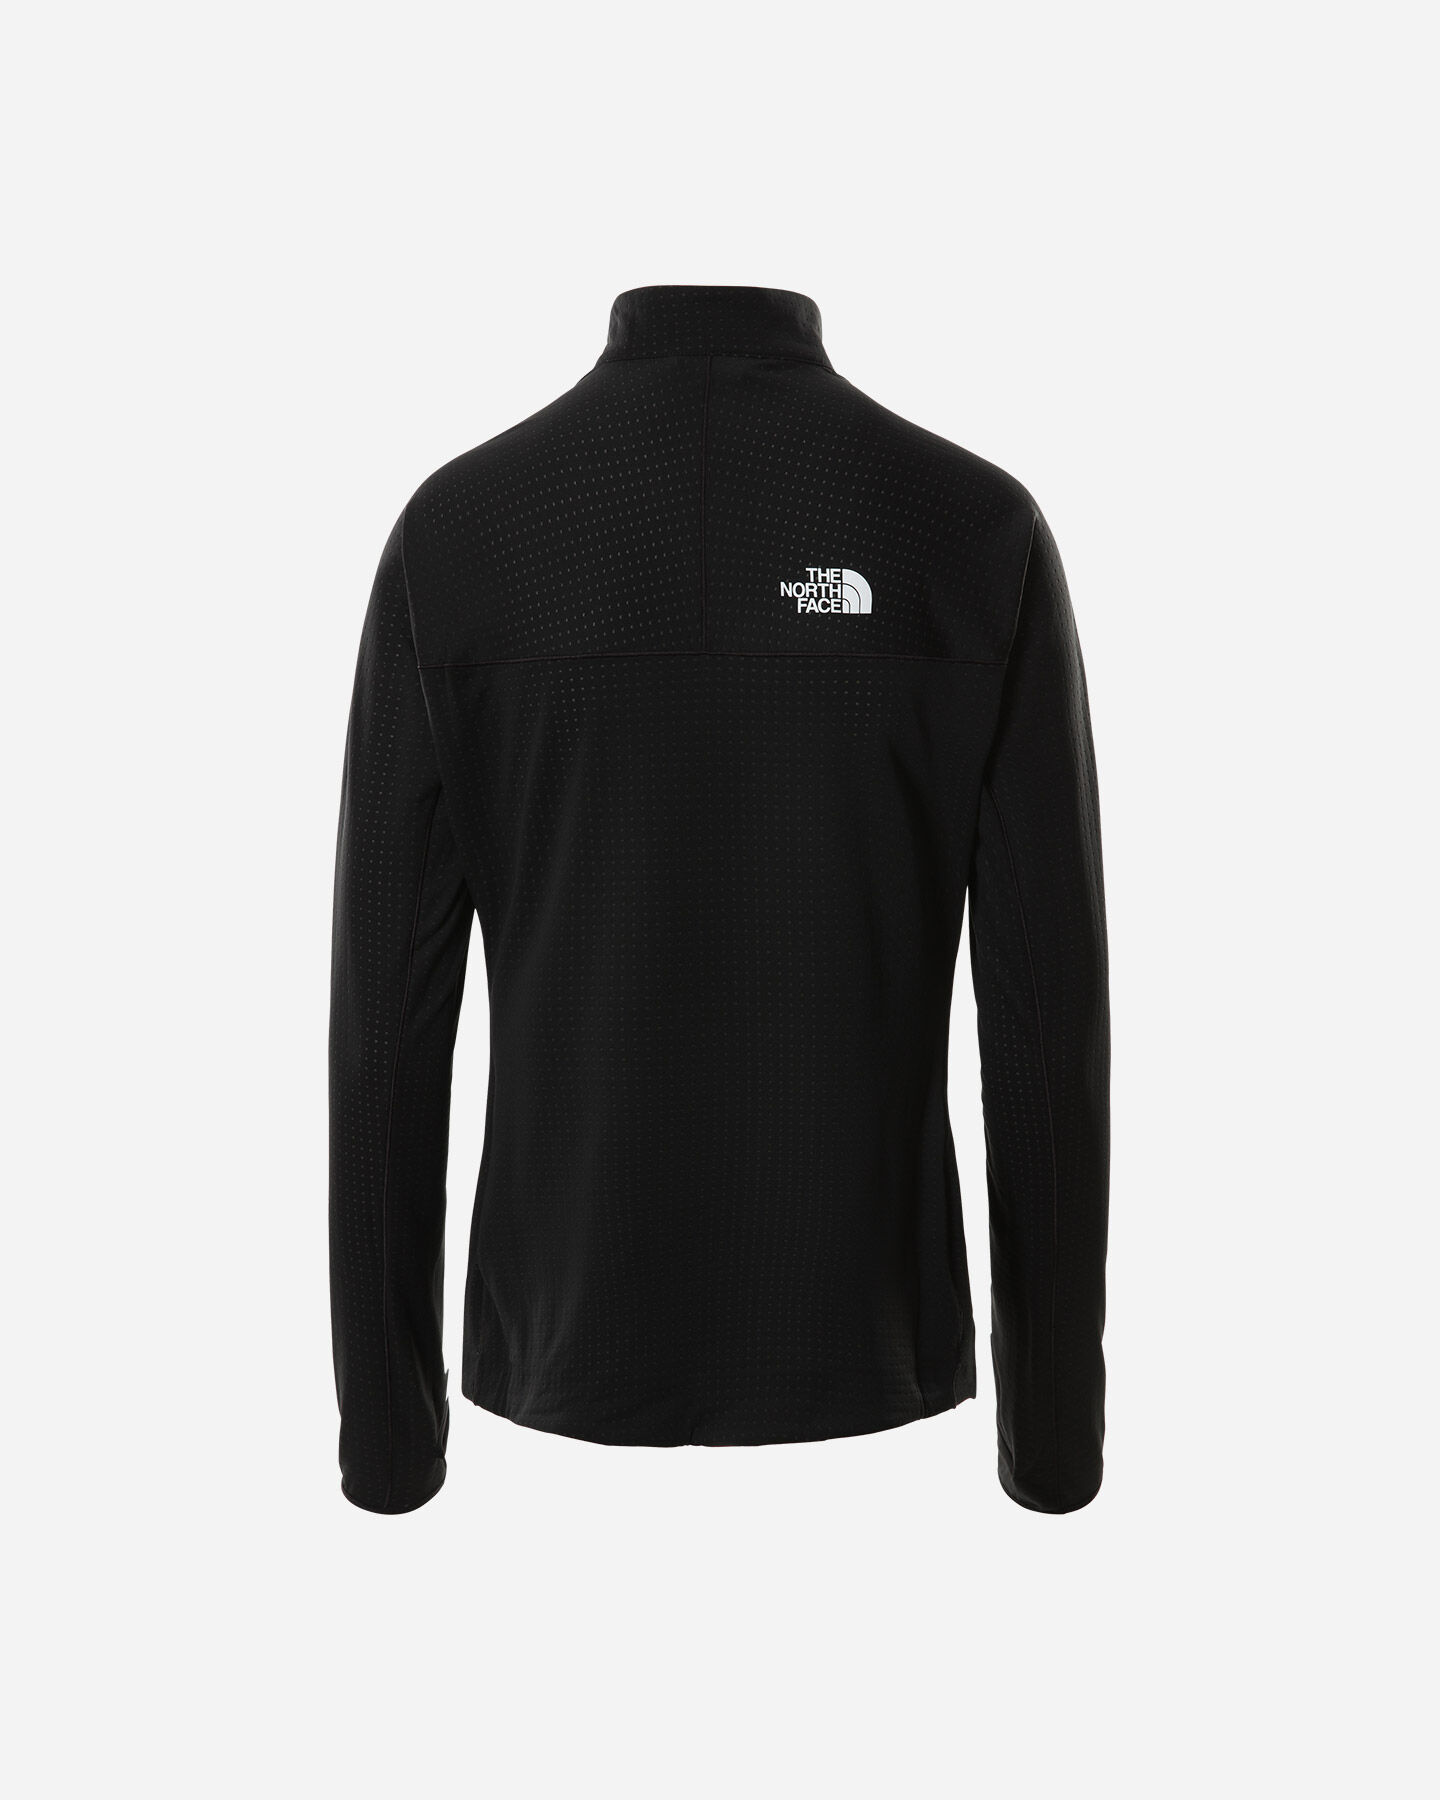  Pile THE NORTH FACE SUMMIT DOT  W S5243178|JK3|XS scatto 1